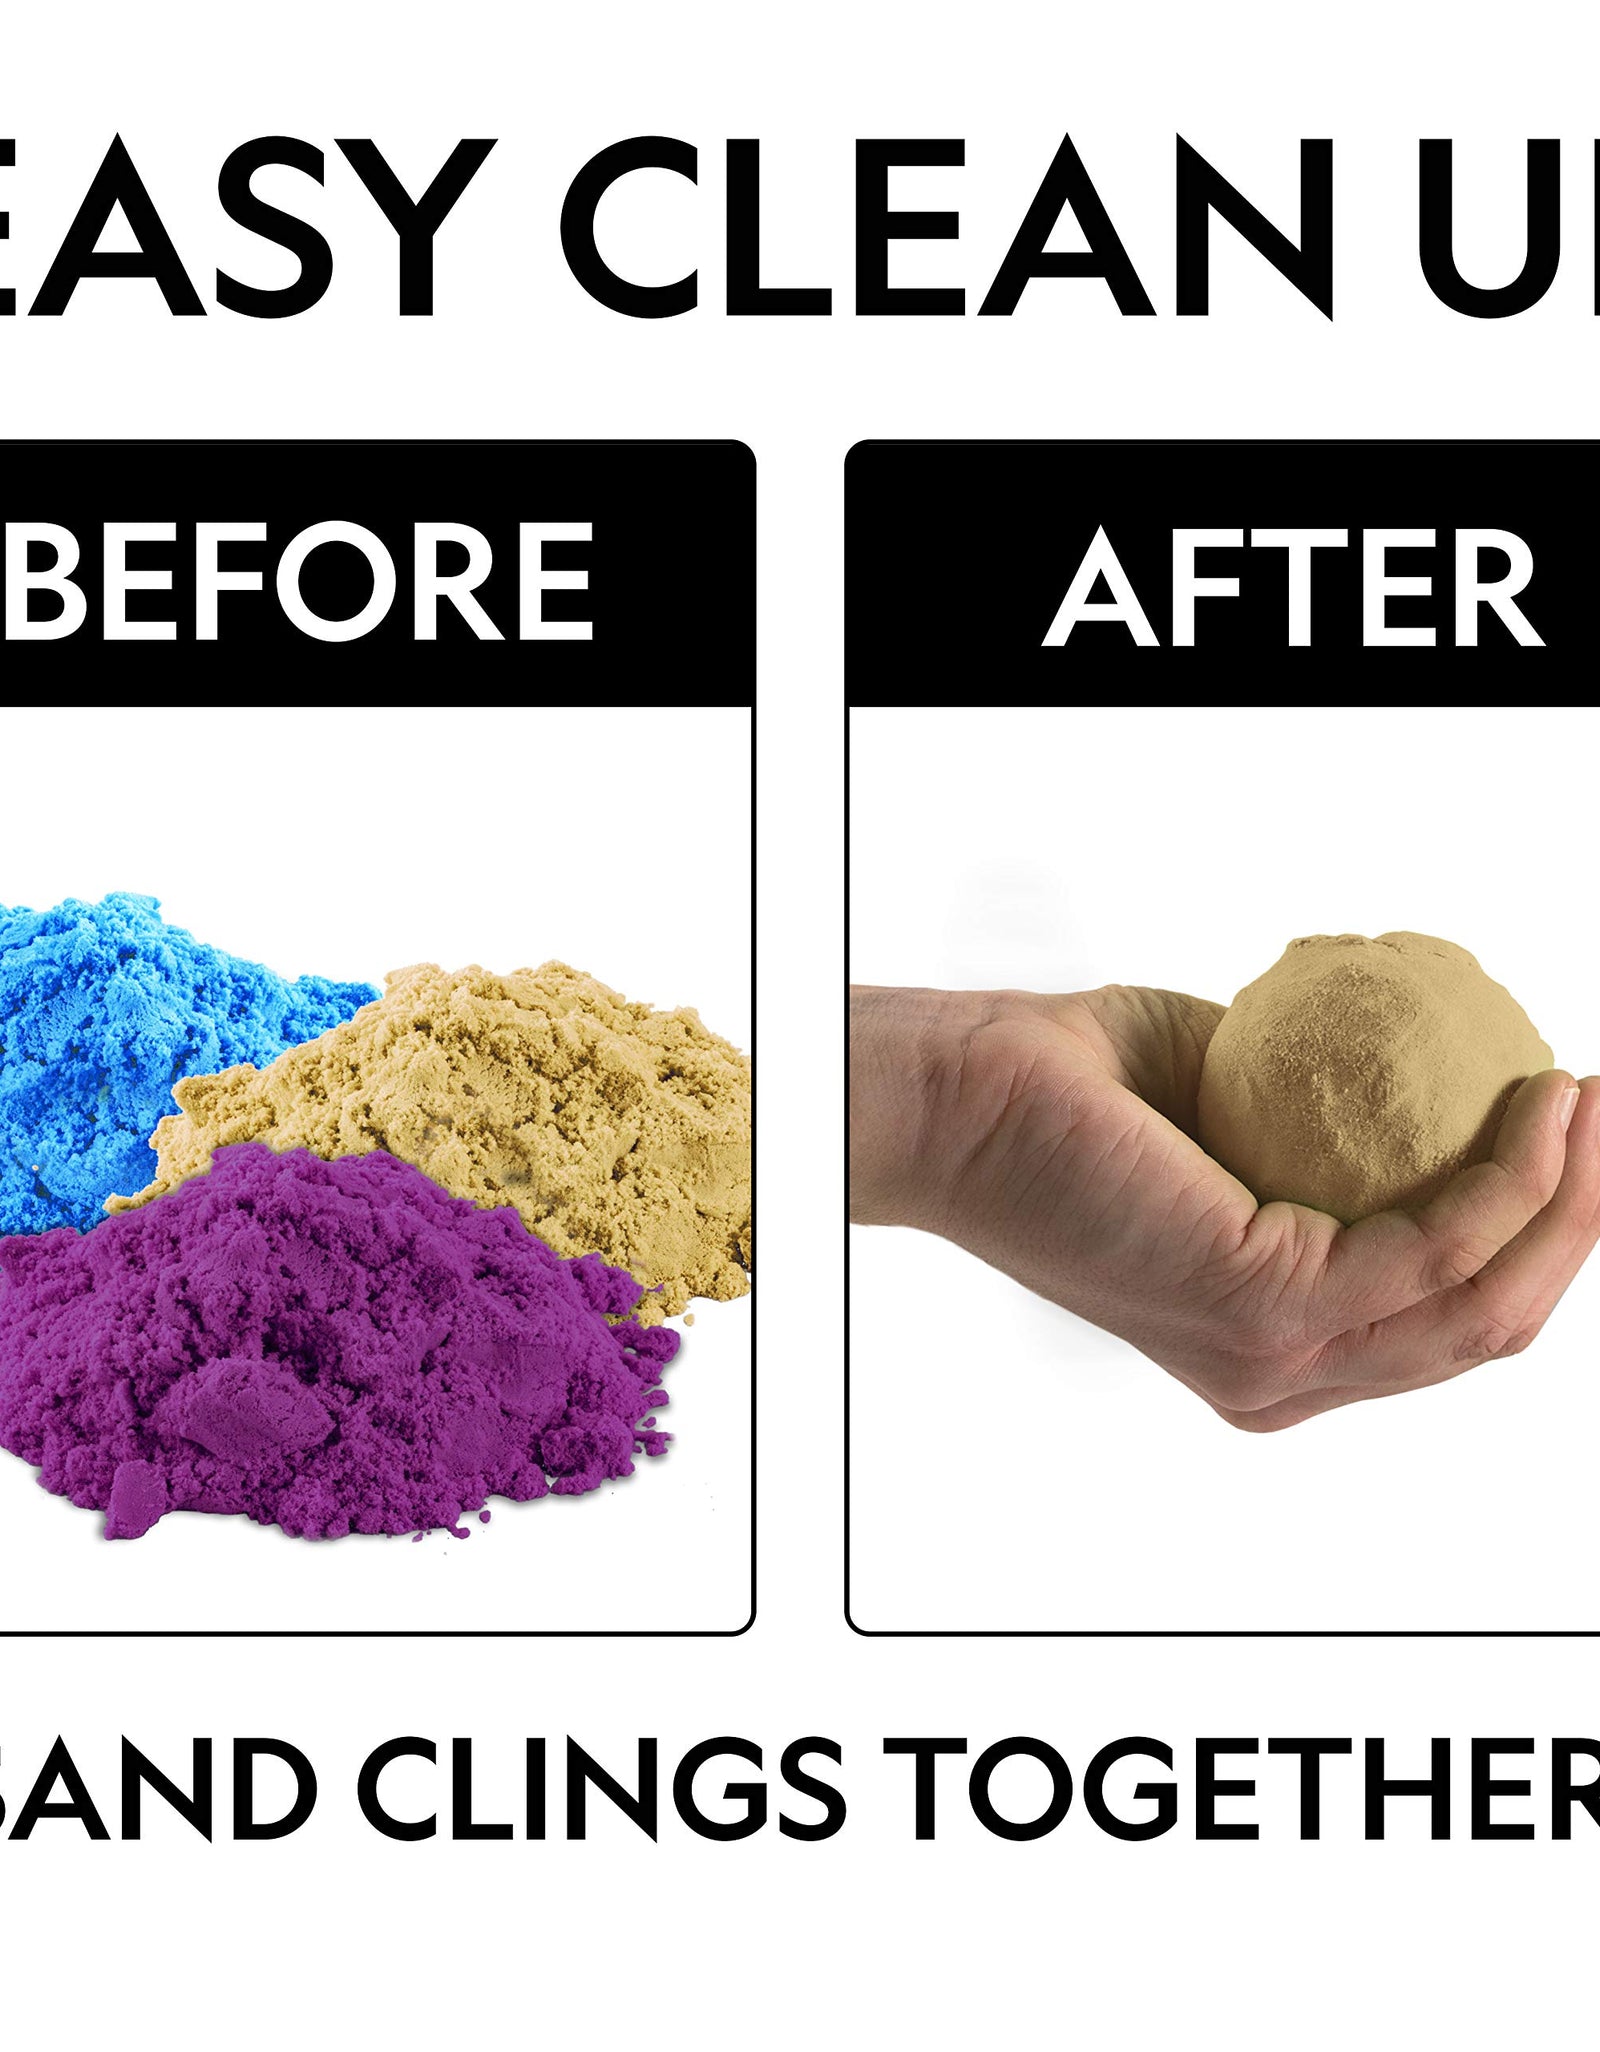 NATIONAL GEOGRAPHIC Play Sand Combo Pack - 2 LBS each of Blue, Purple and Natural Sand with Castle Molds - A Kinetic Sensory Activity